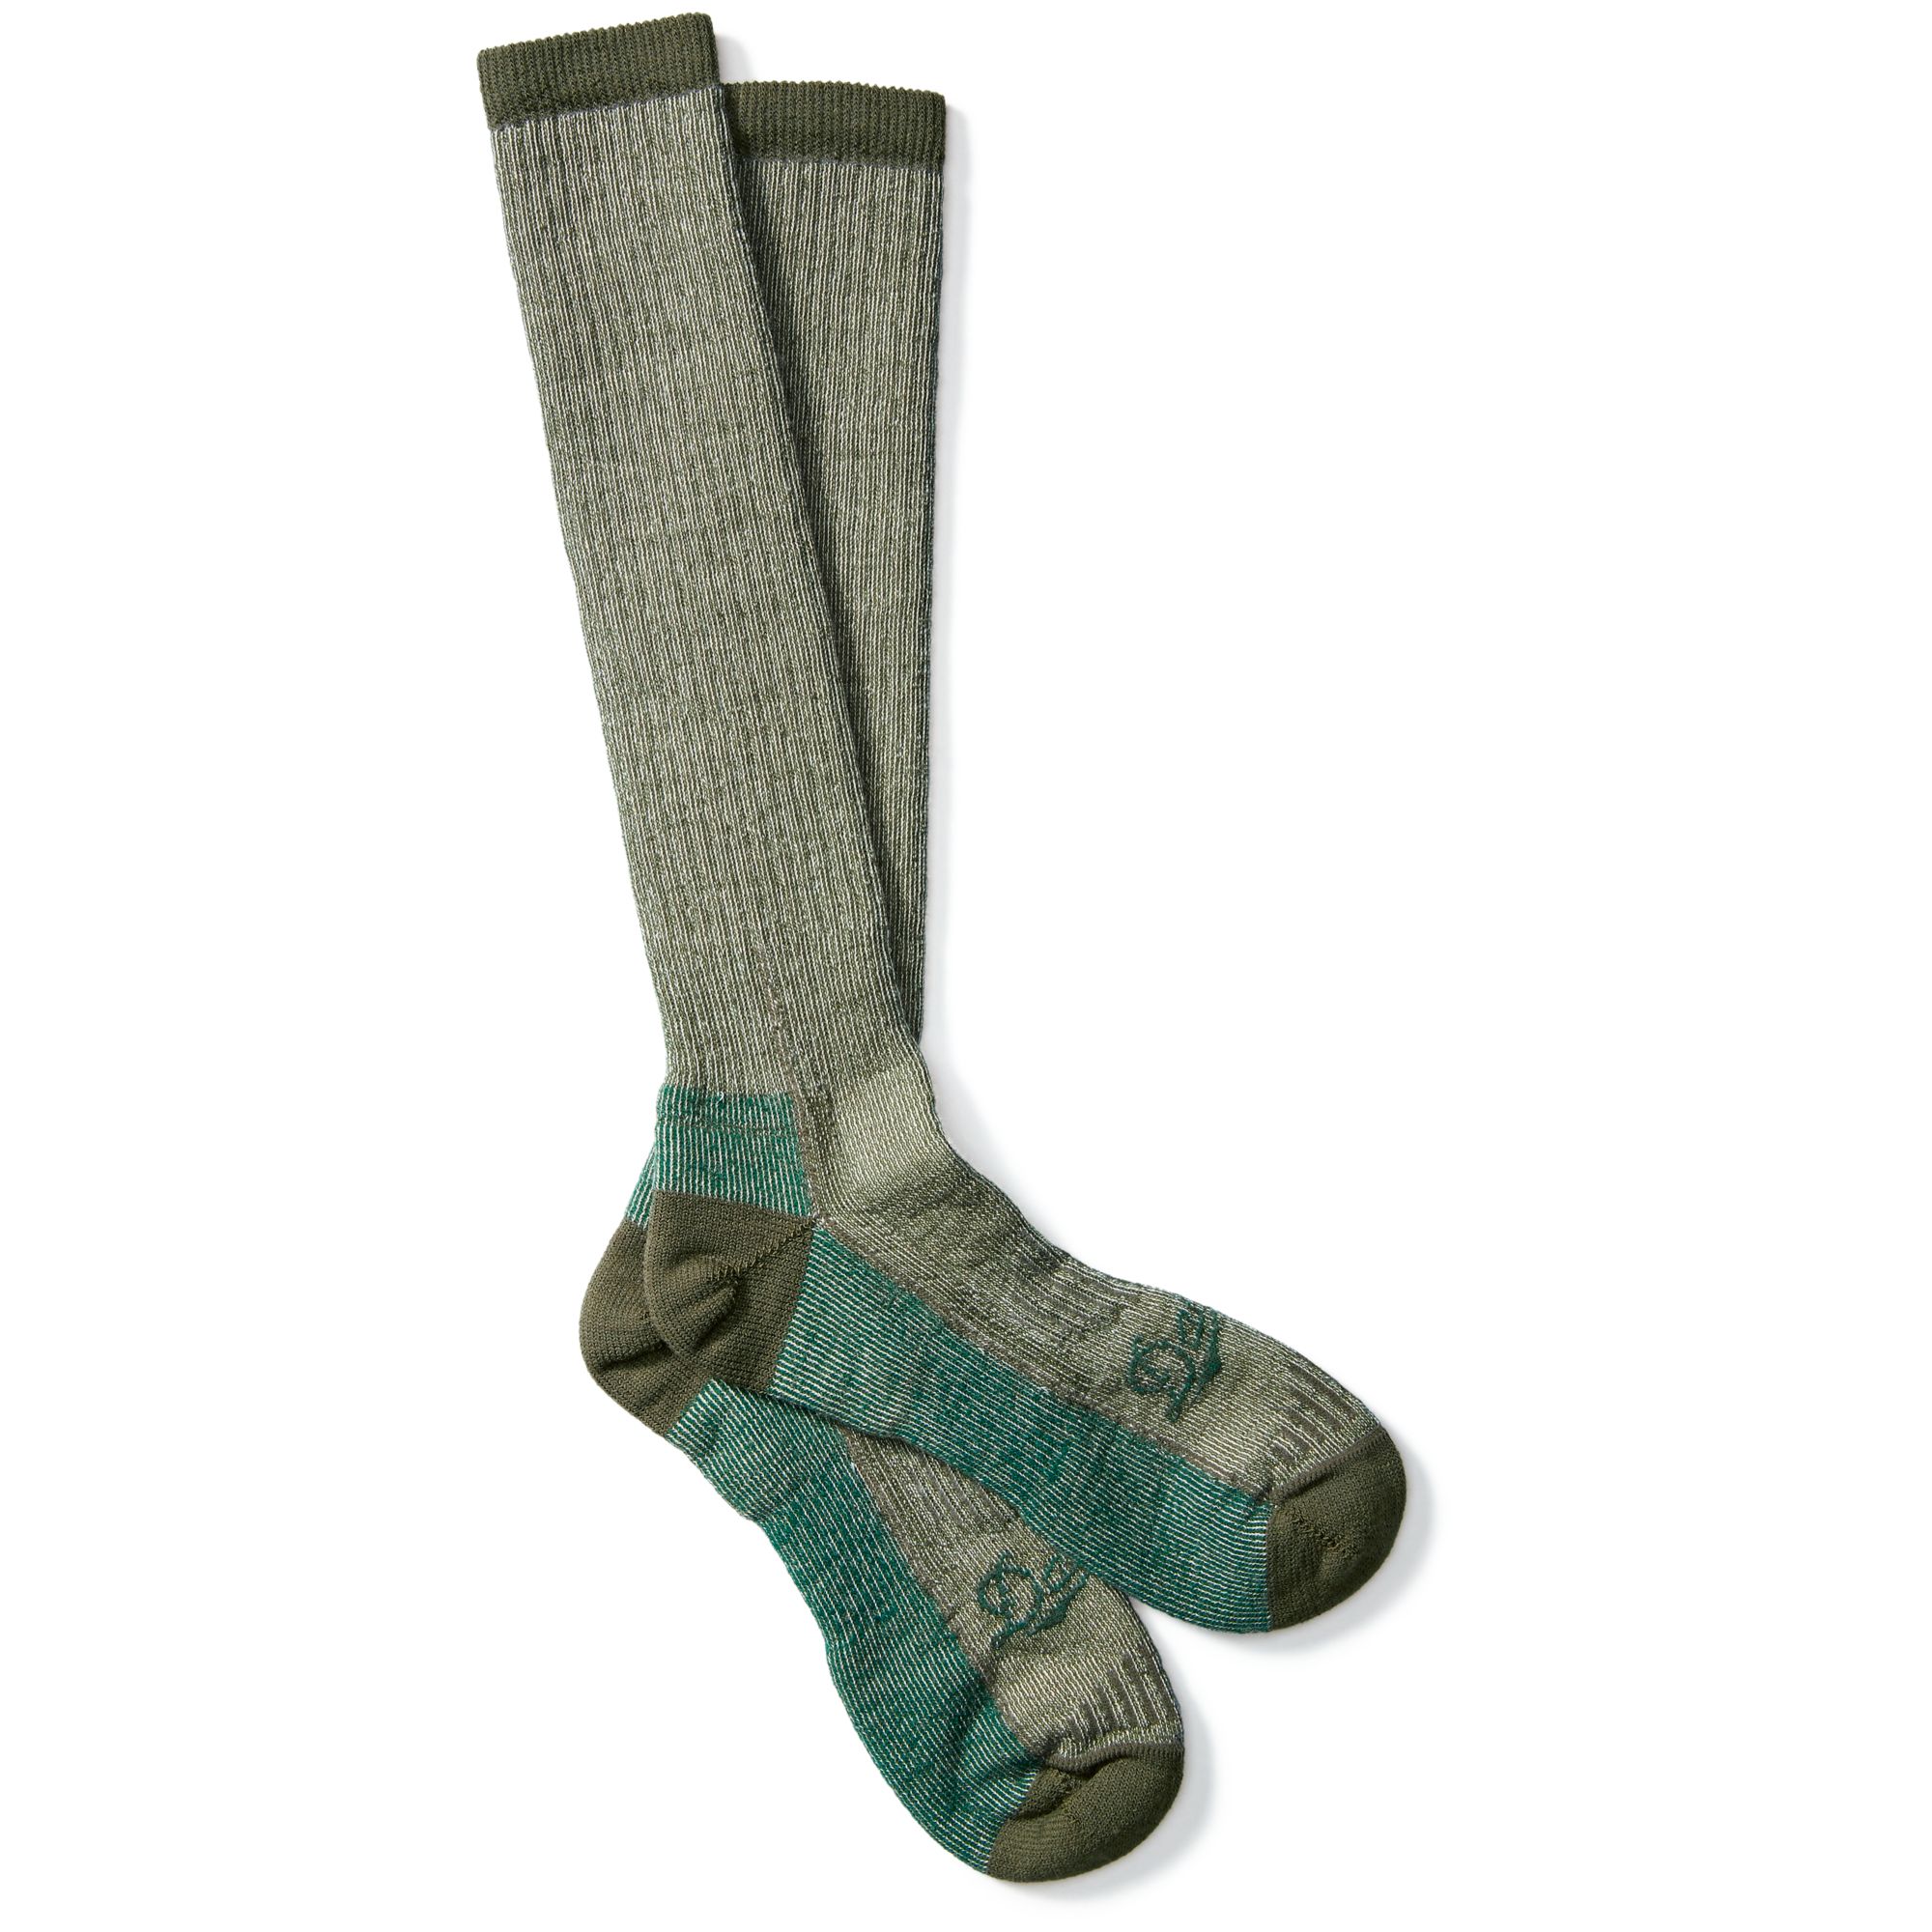 Danner Midweight Hunting Sock